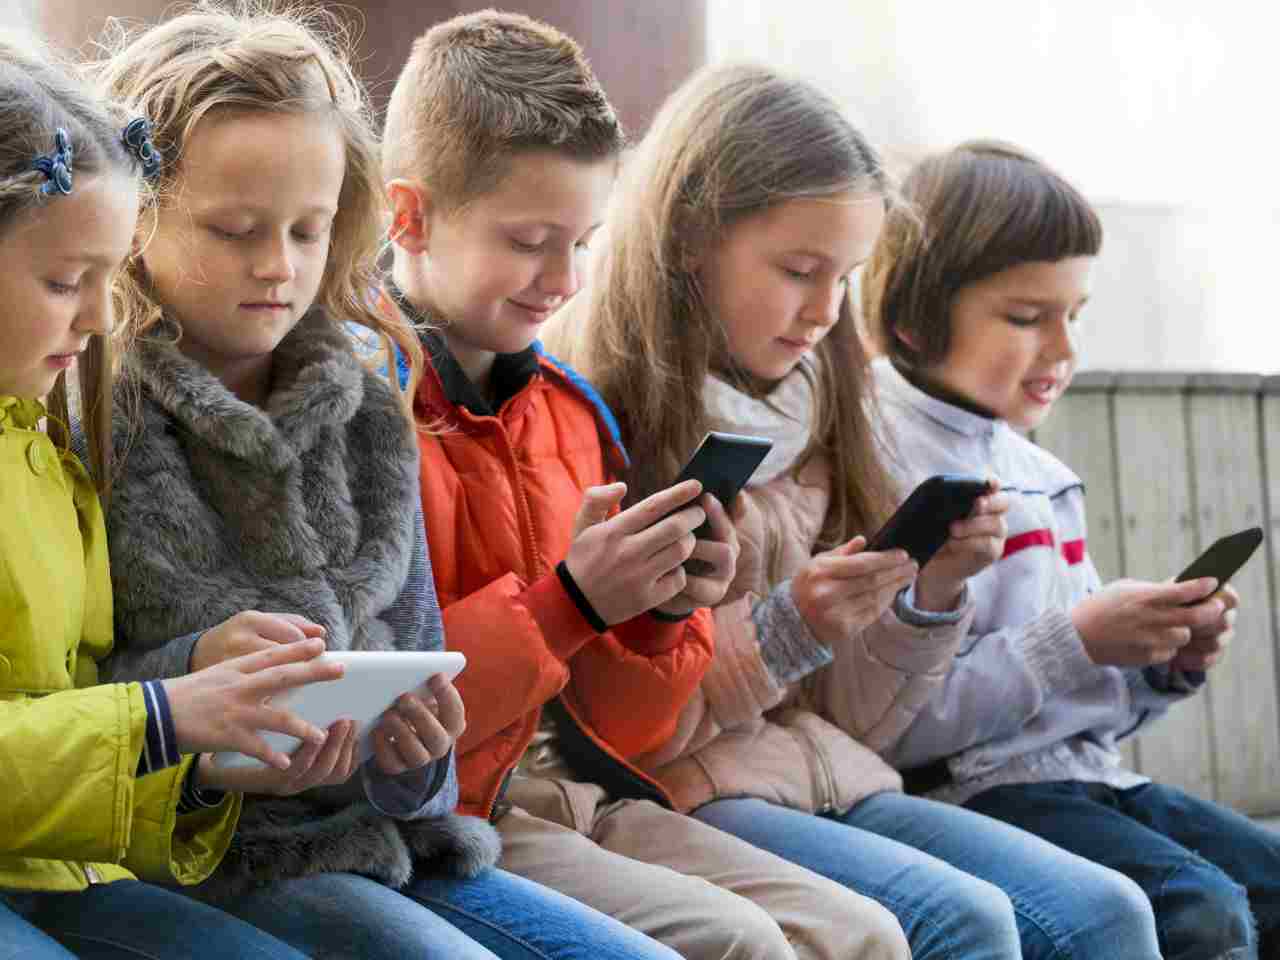 Effects of mobiles on Children